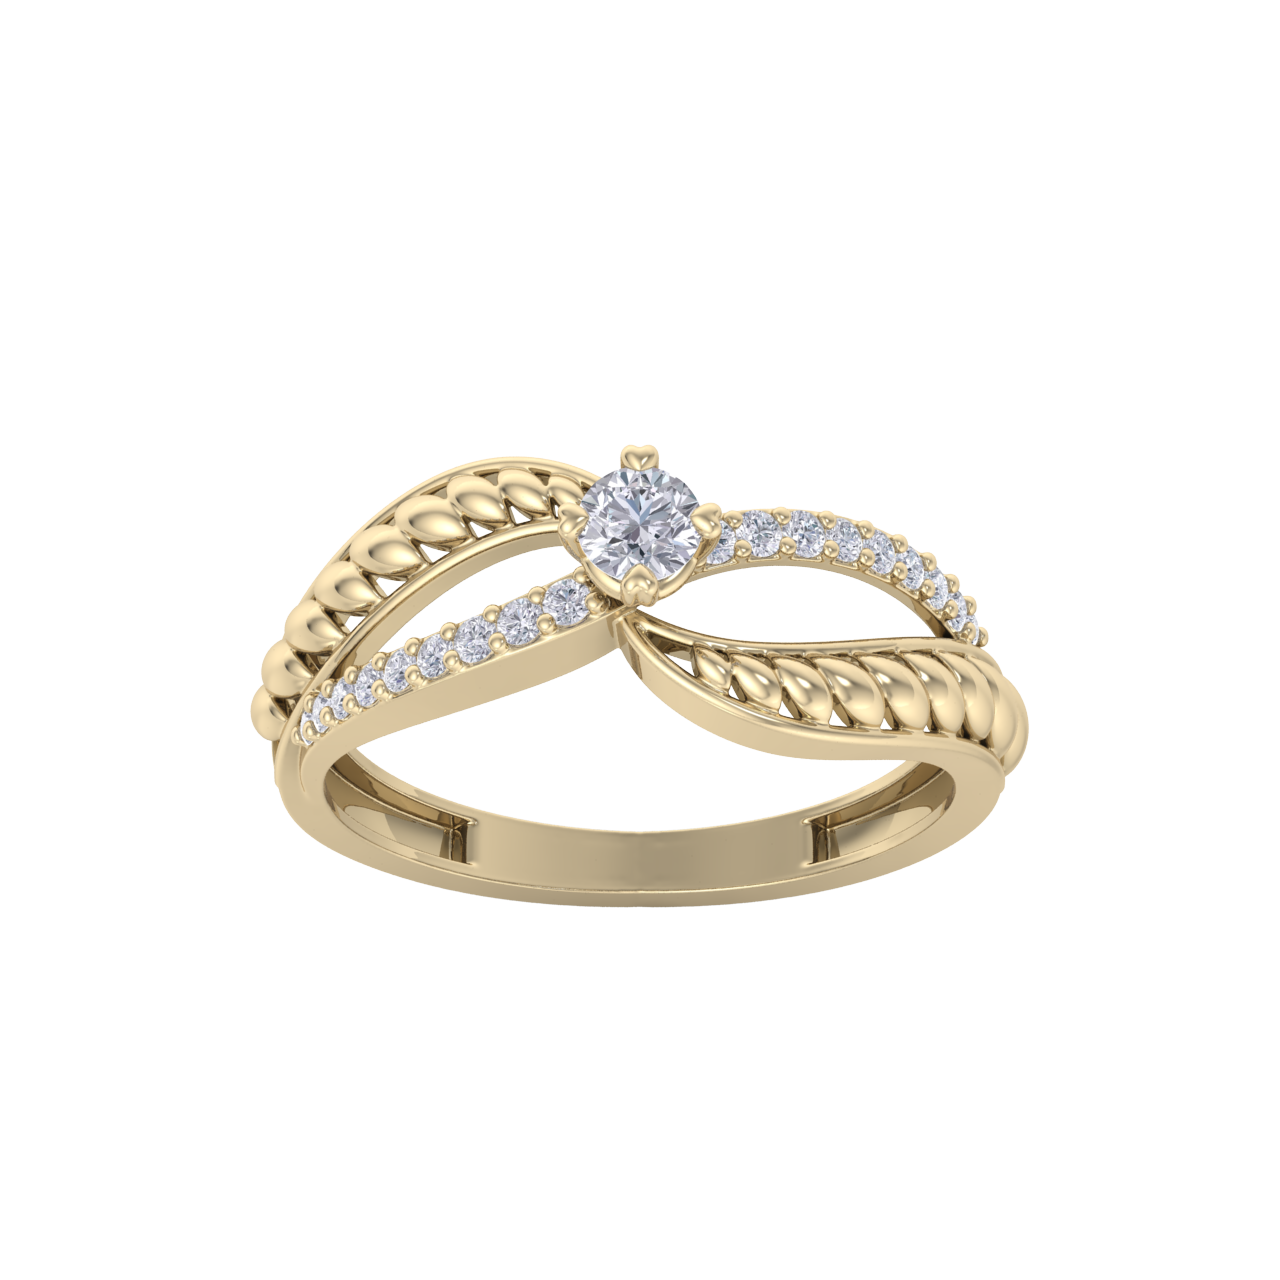 Diamond ring in yellow gold with white diamonds of 0.22 ct in weight